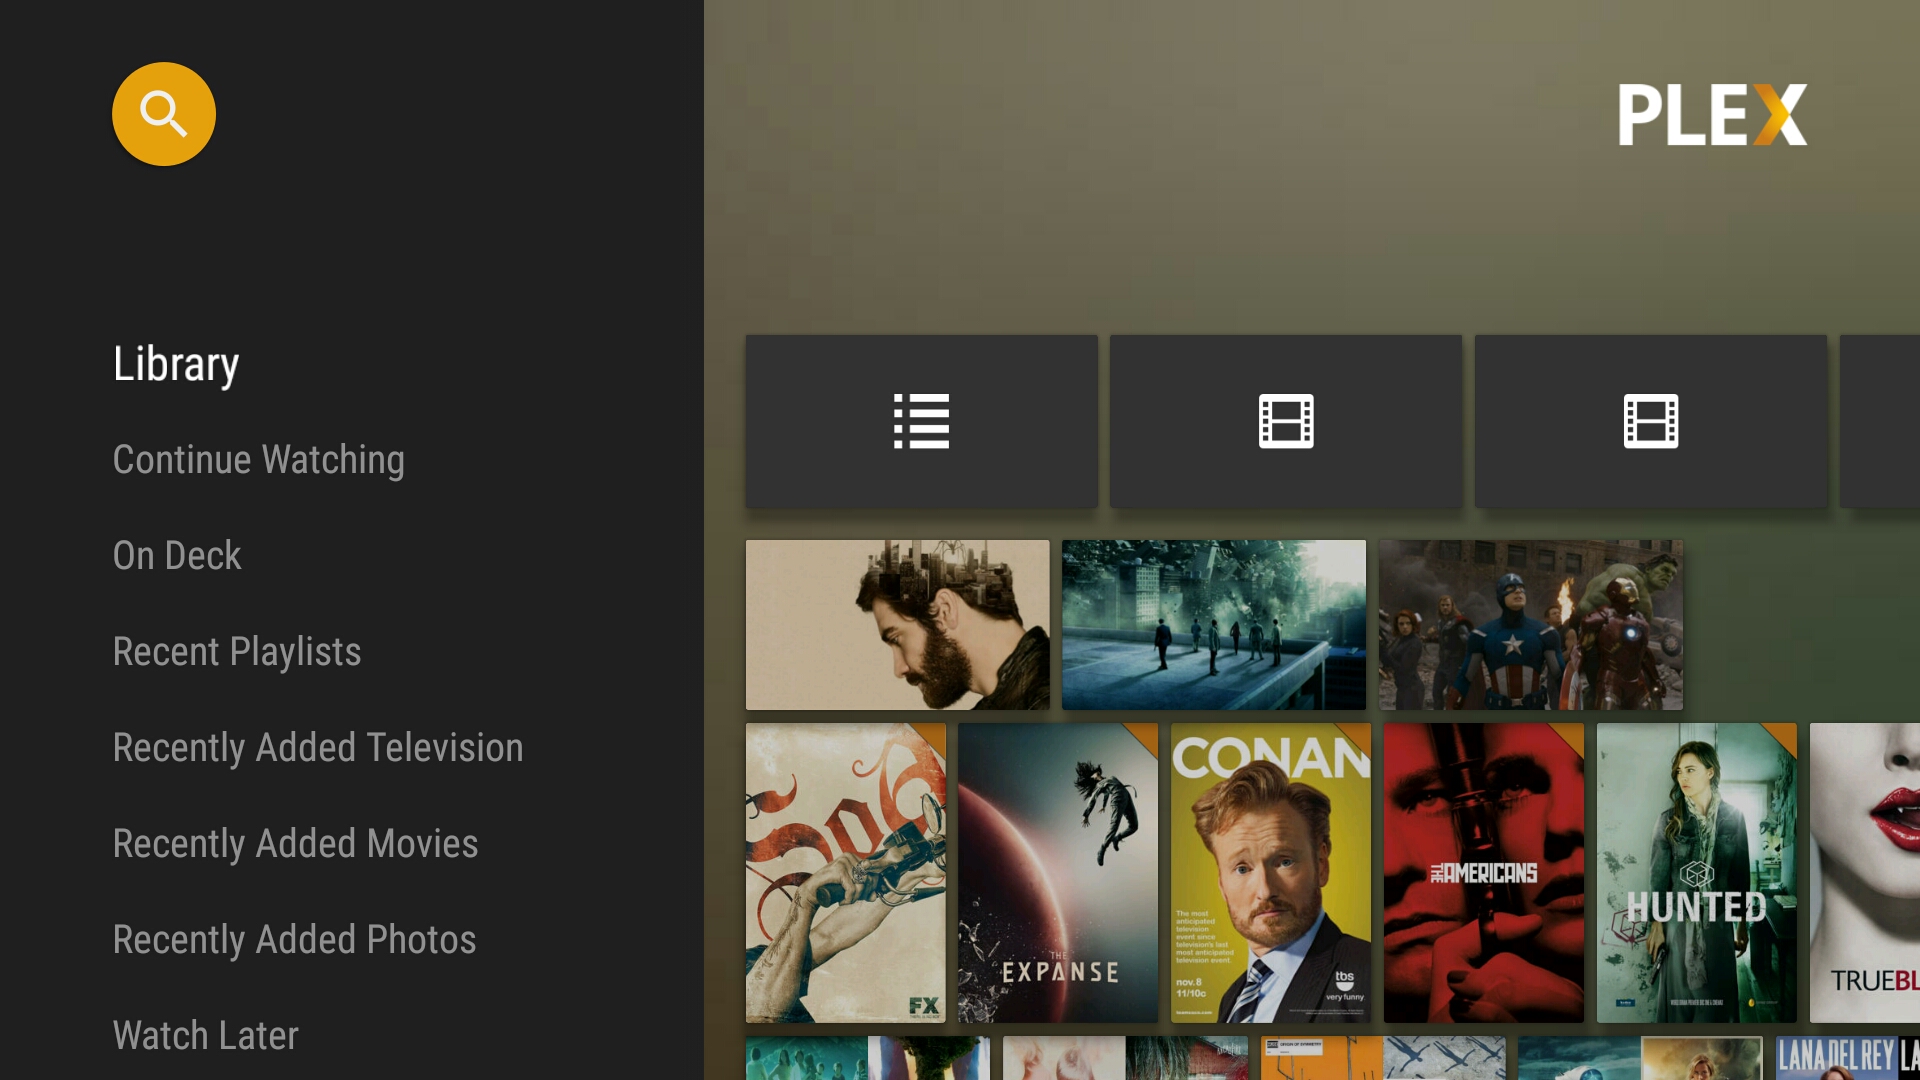 plex download for android tv box